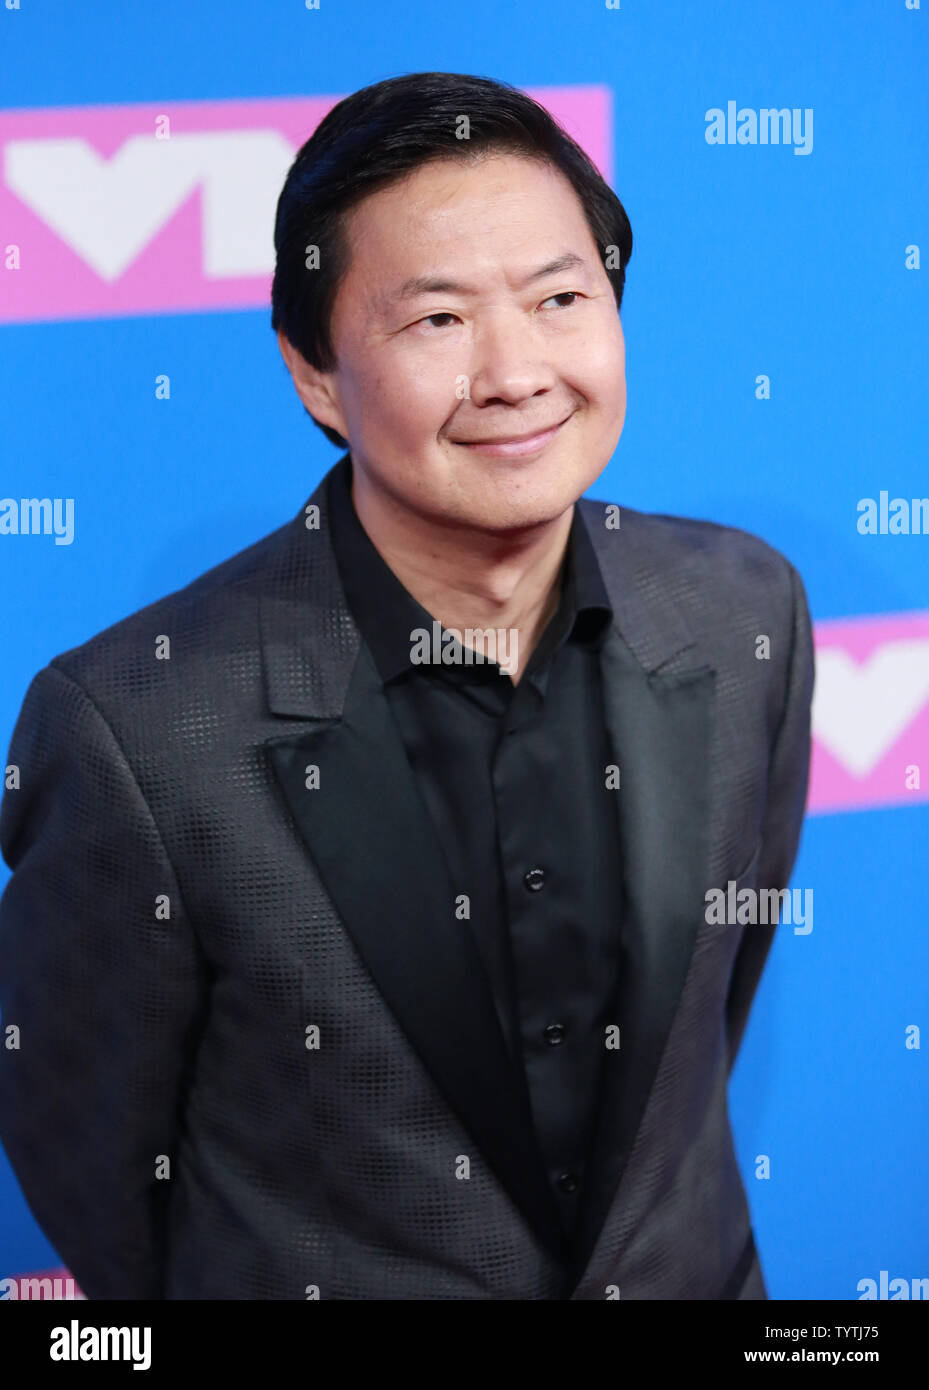 Ken Jeong arrives on the red carpet at the 35th annual MTV Video Music Awards at Radio City Music Hall in New York City on August 20, 2018.    Photo by Serena Xu-Ning/UPI Stock Photo